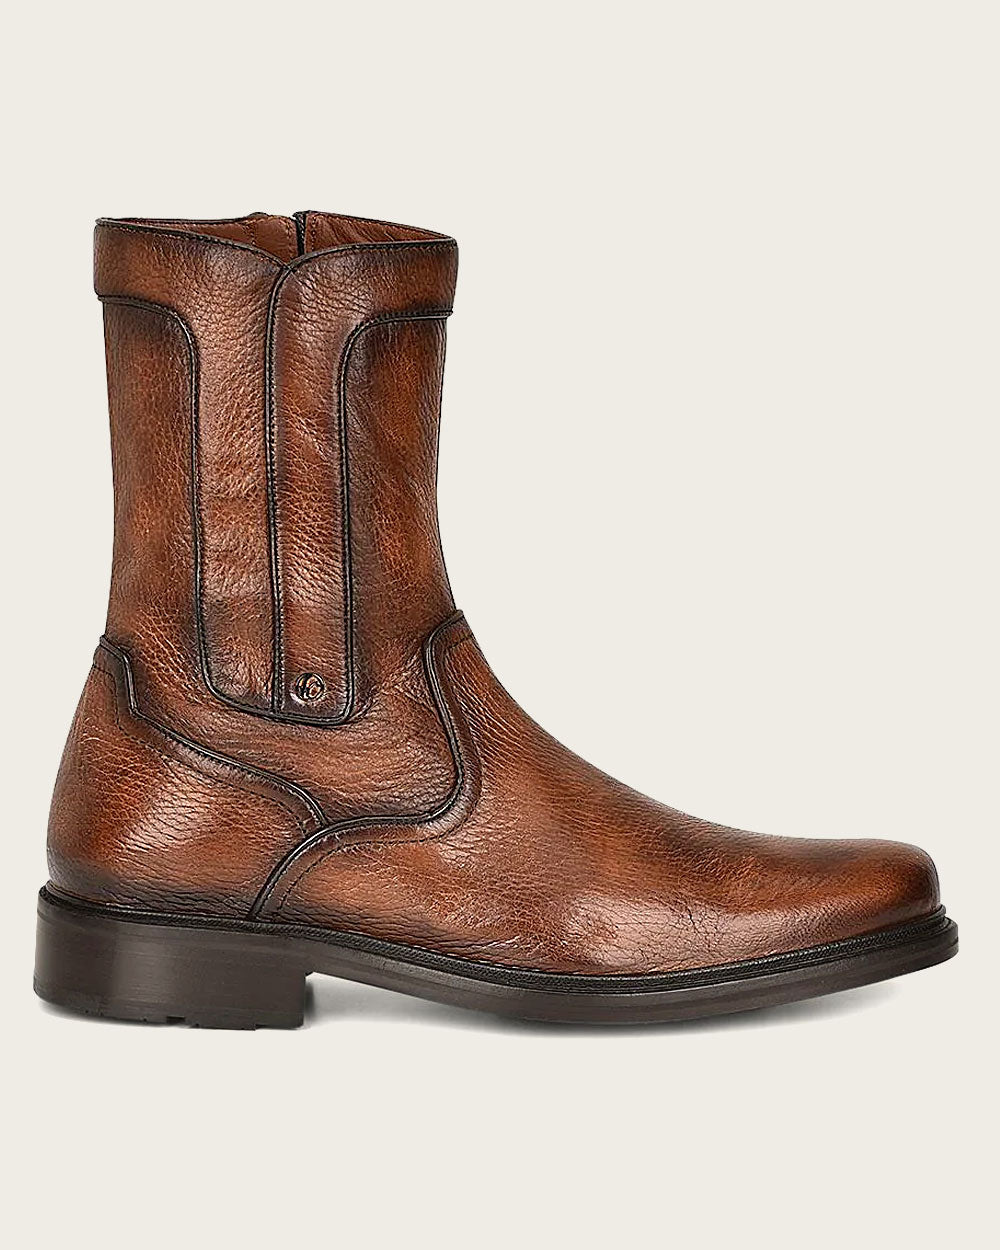 Delicate Care: Cuadra's deer leather boots are not for rough wear.